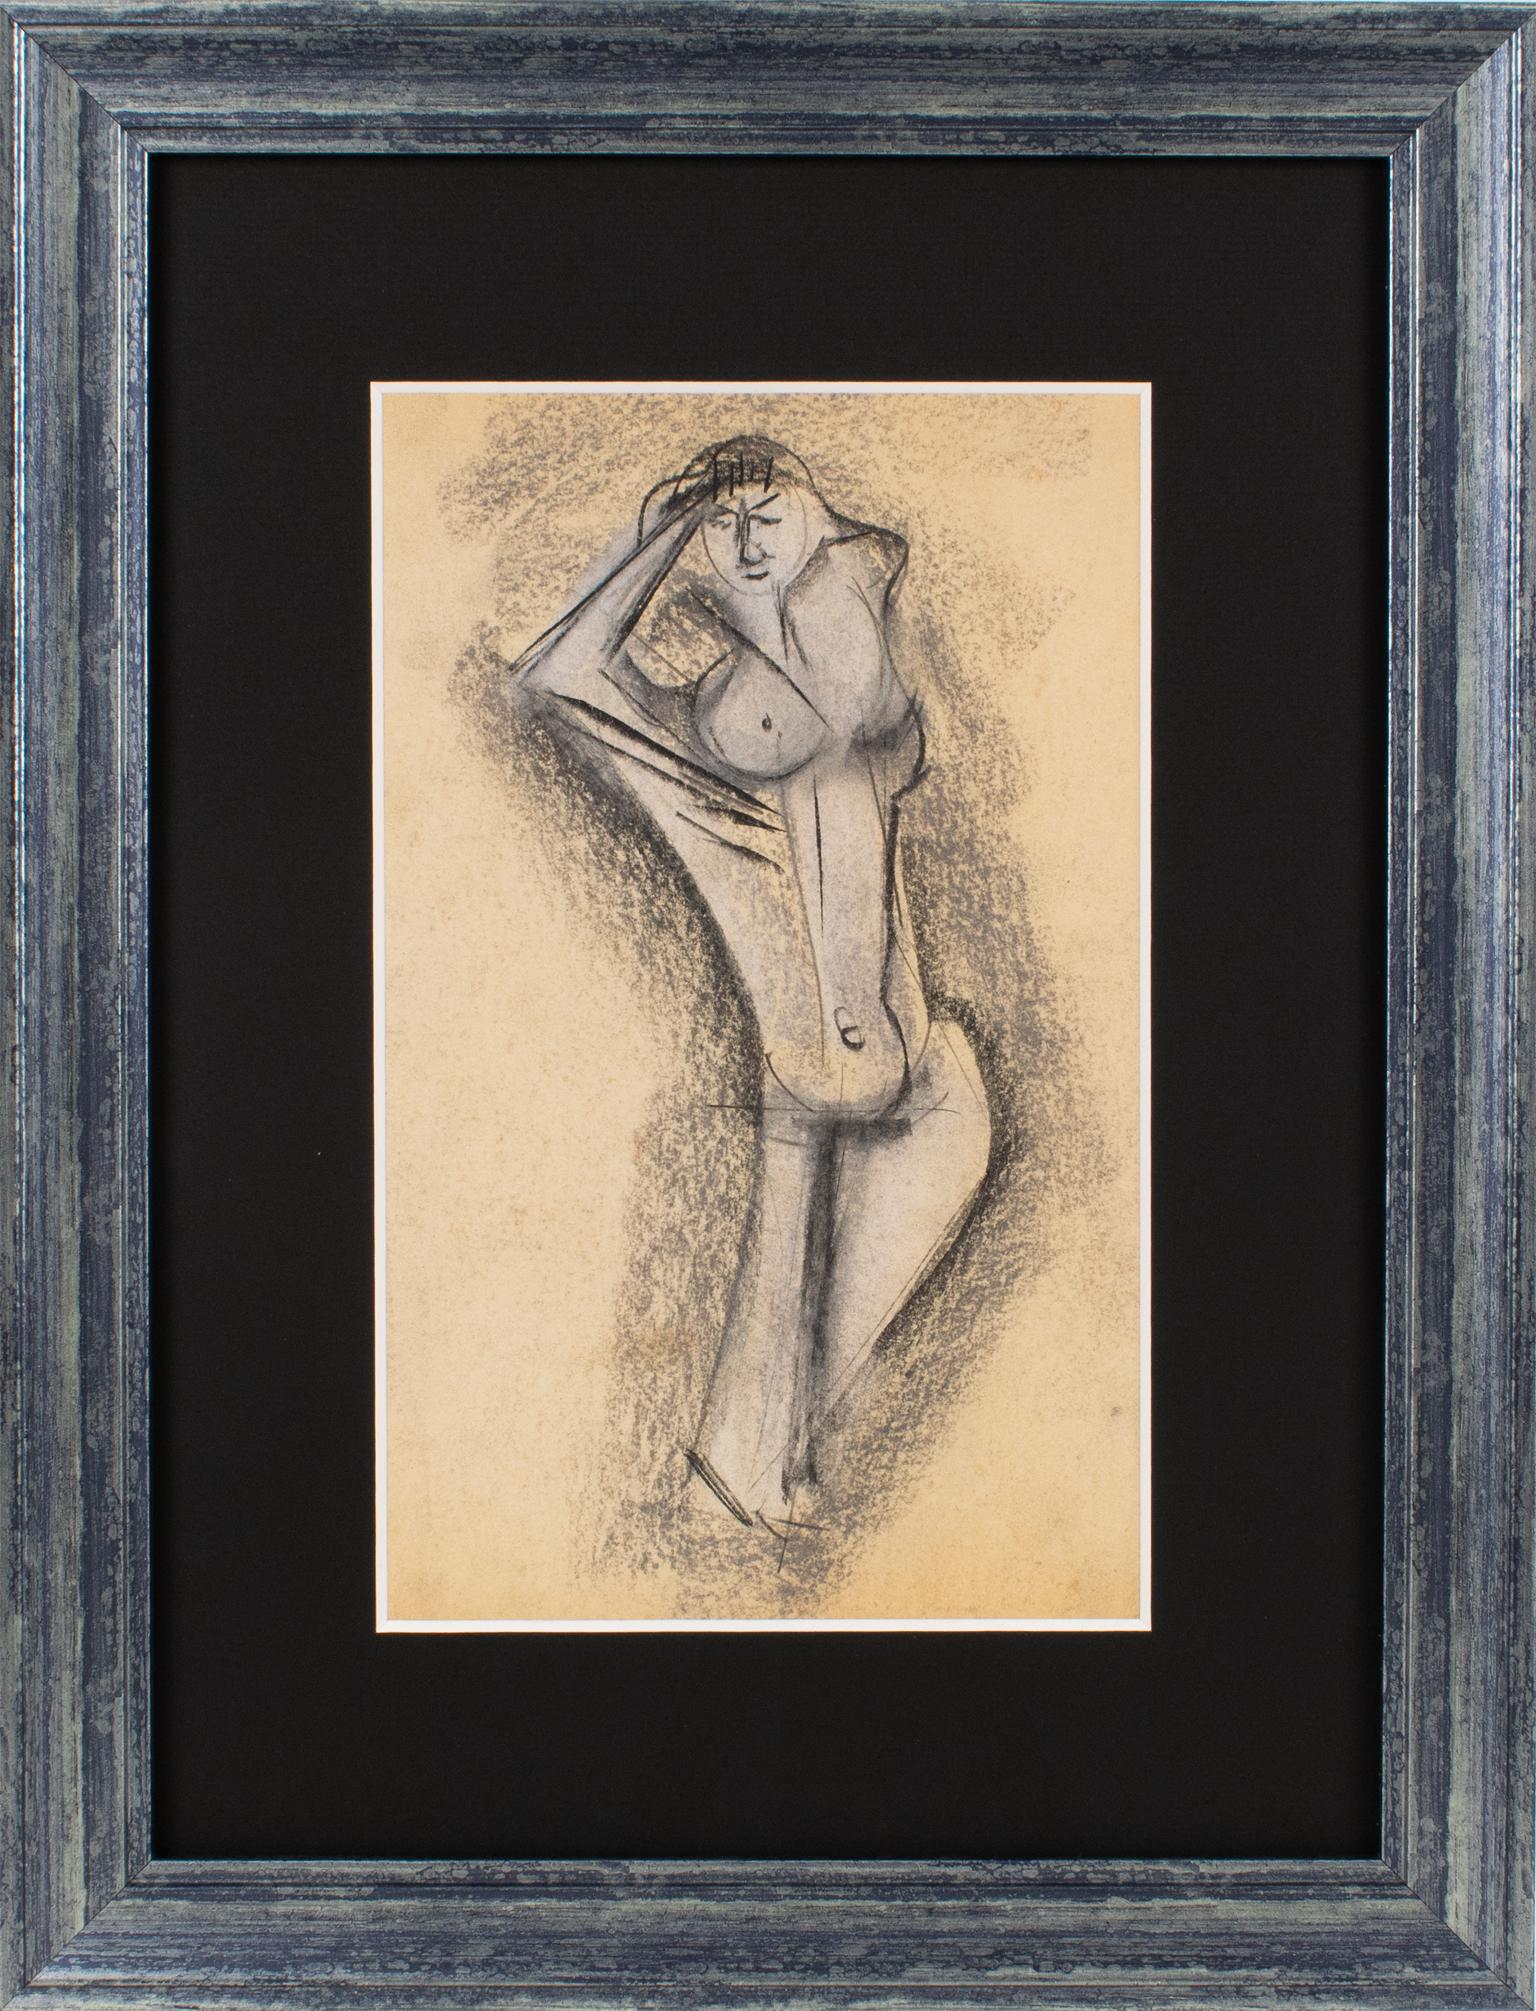 This elegant pastel painting on paper was created by John Alfred Begg (1903 - 1974). This piece features a striking cubist nude study in a blue-gray color with contrasting black lines. There is no visible signature. 
This artwork comes from the